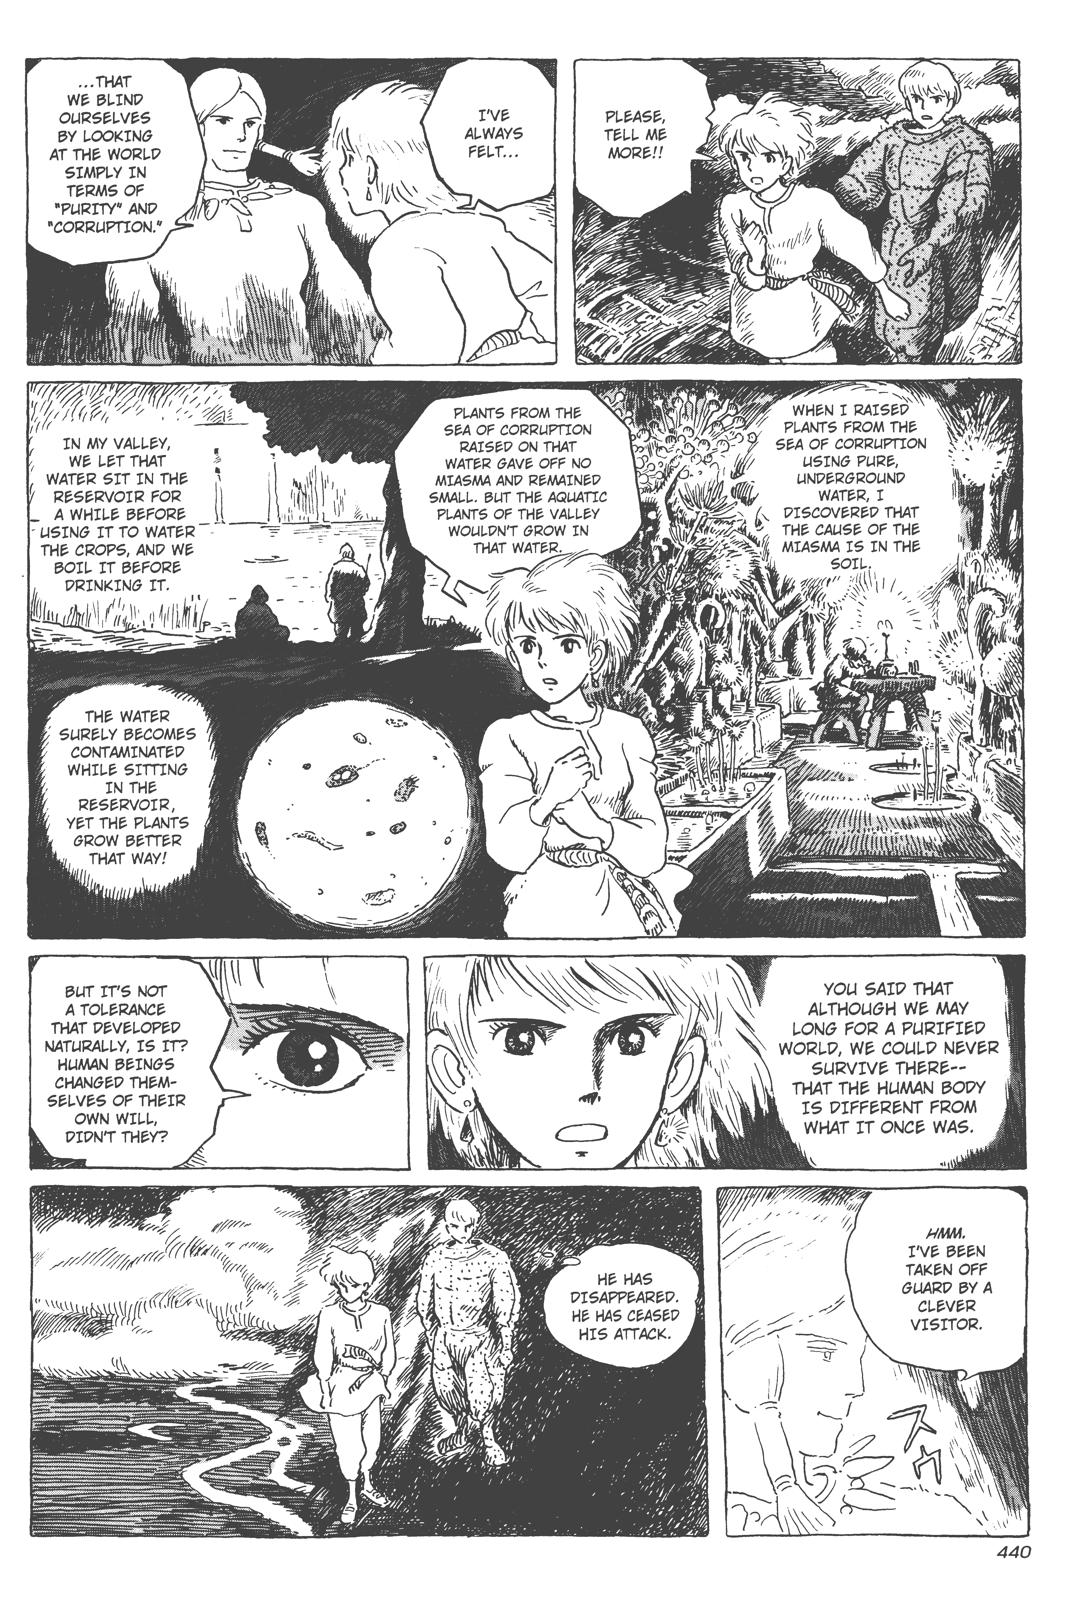 Nausicaä Of The Valley Of The Wind, Chapter 7 image 128